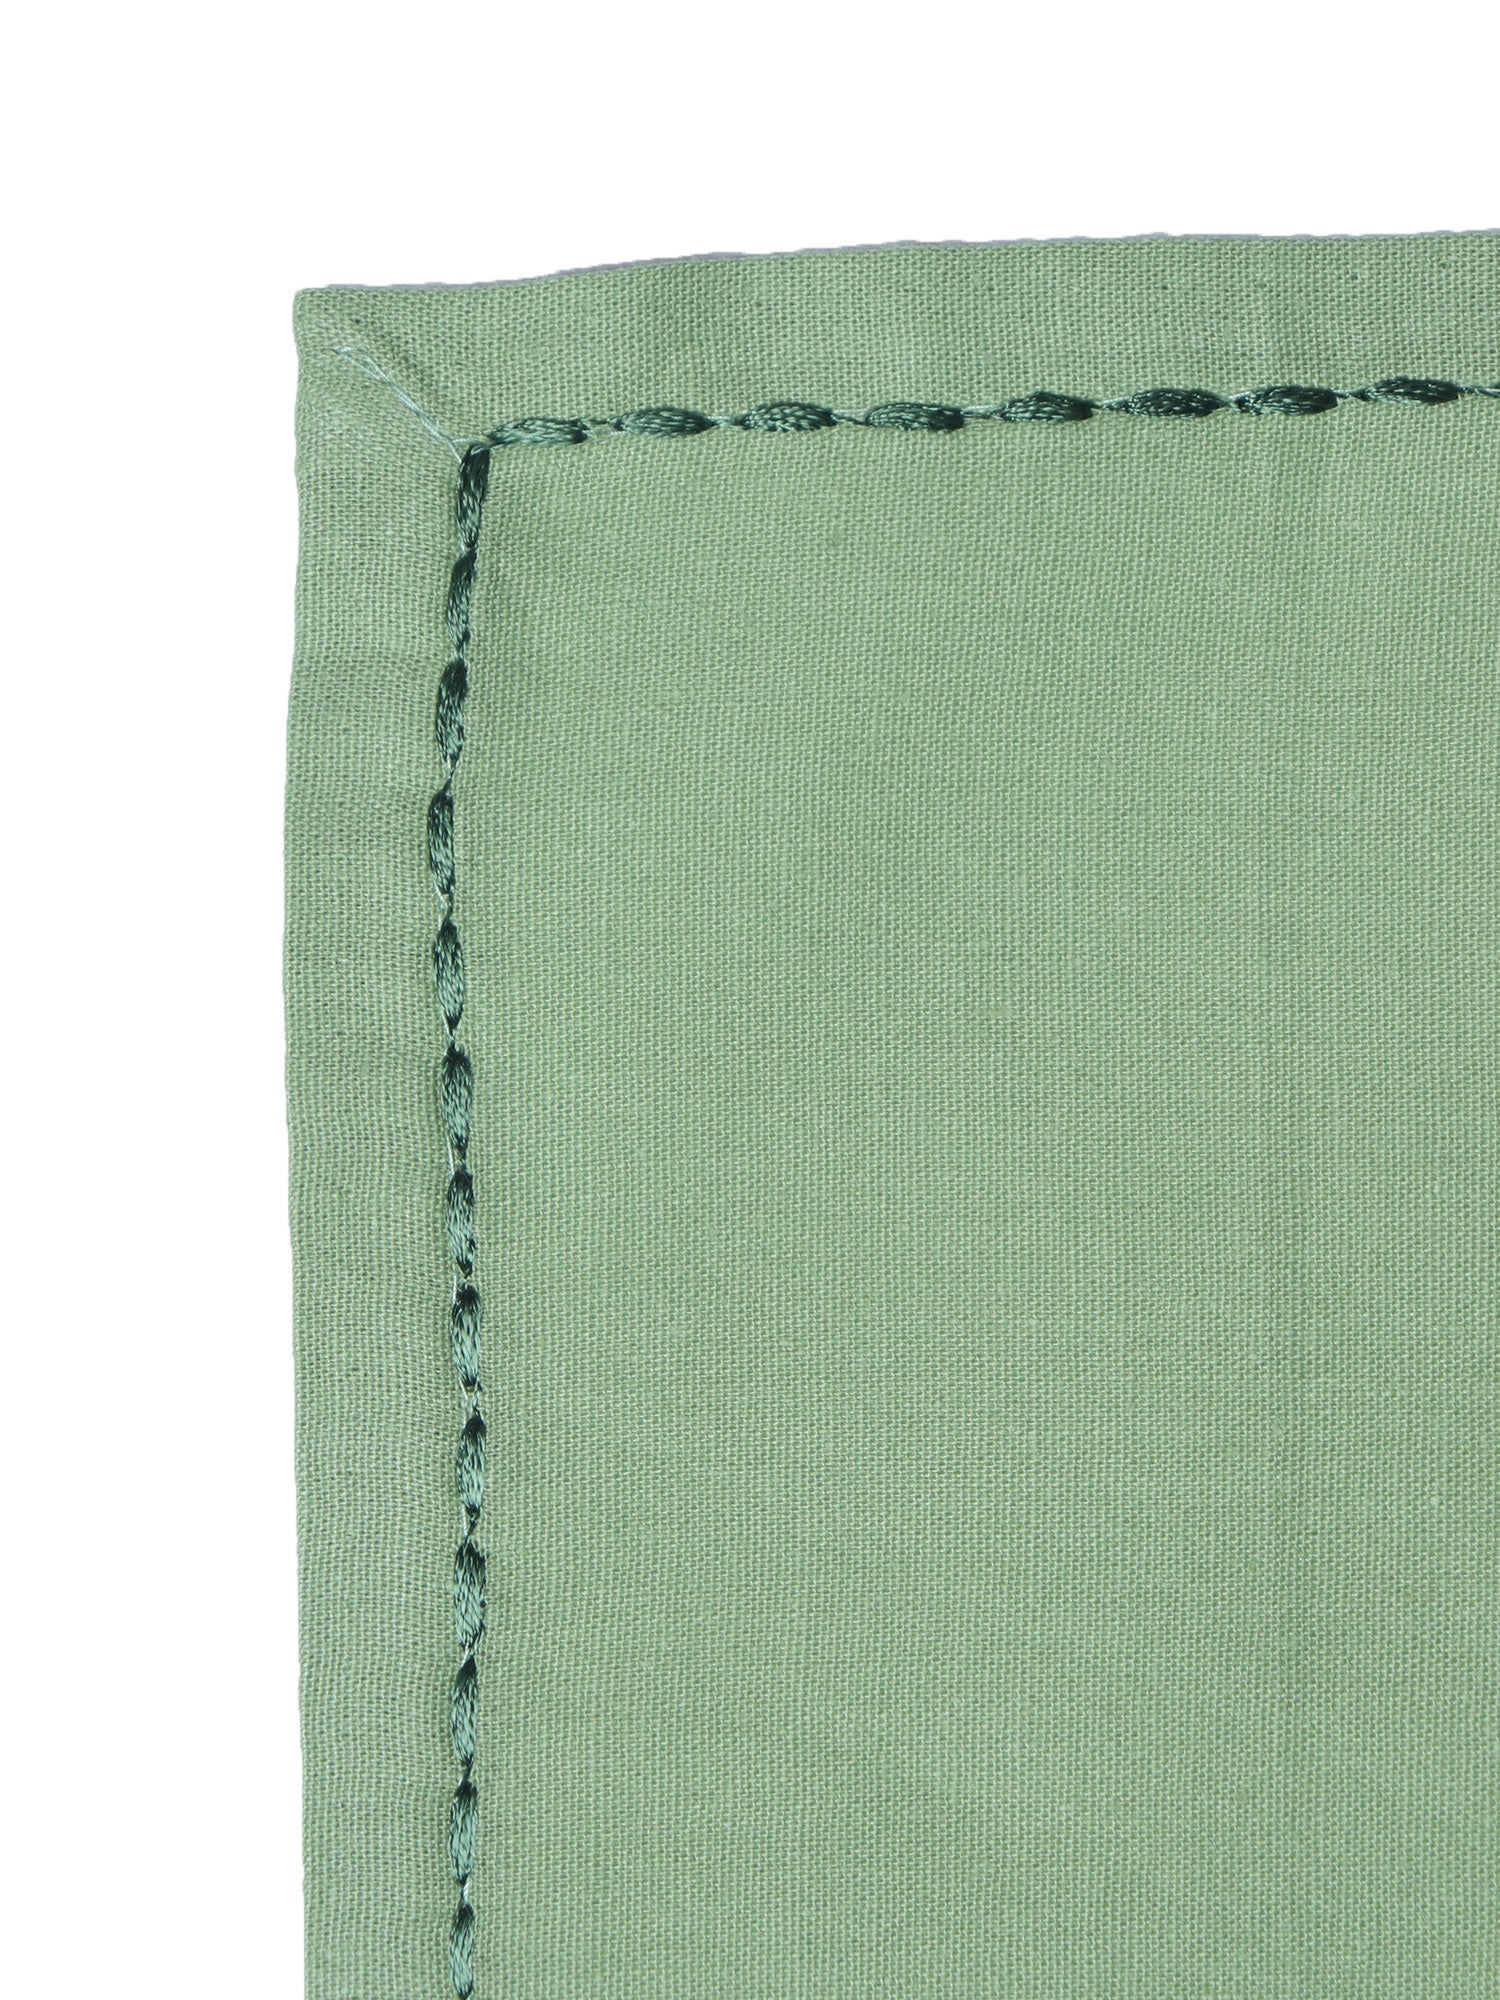 closeup of chawal taka hand embroidered set of 6 dinner napkins in olive green color - 16x16 inch